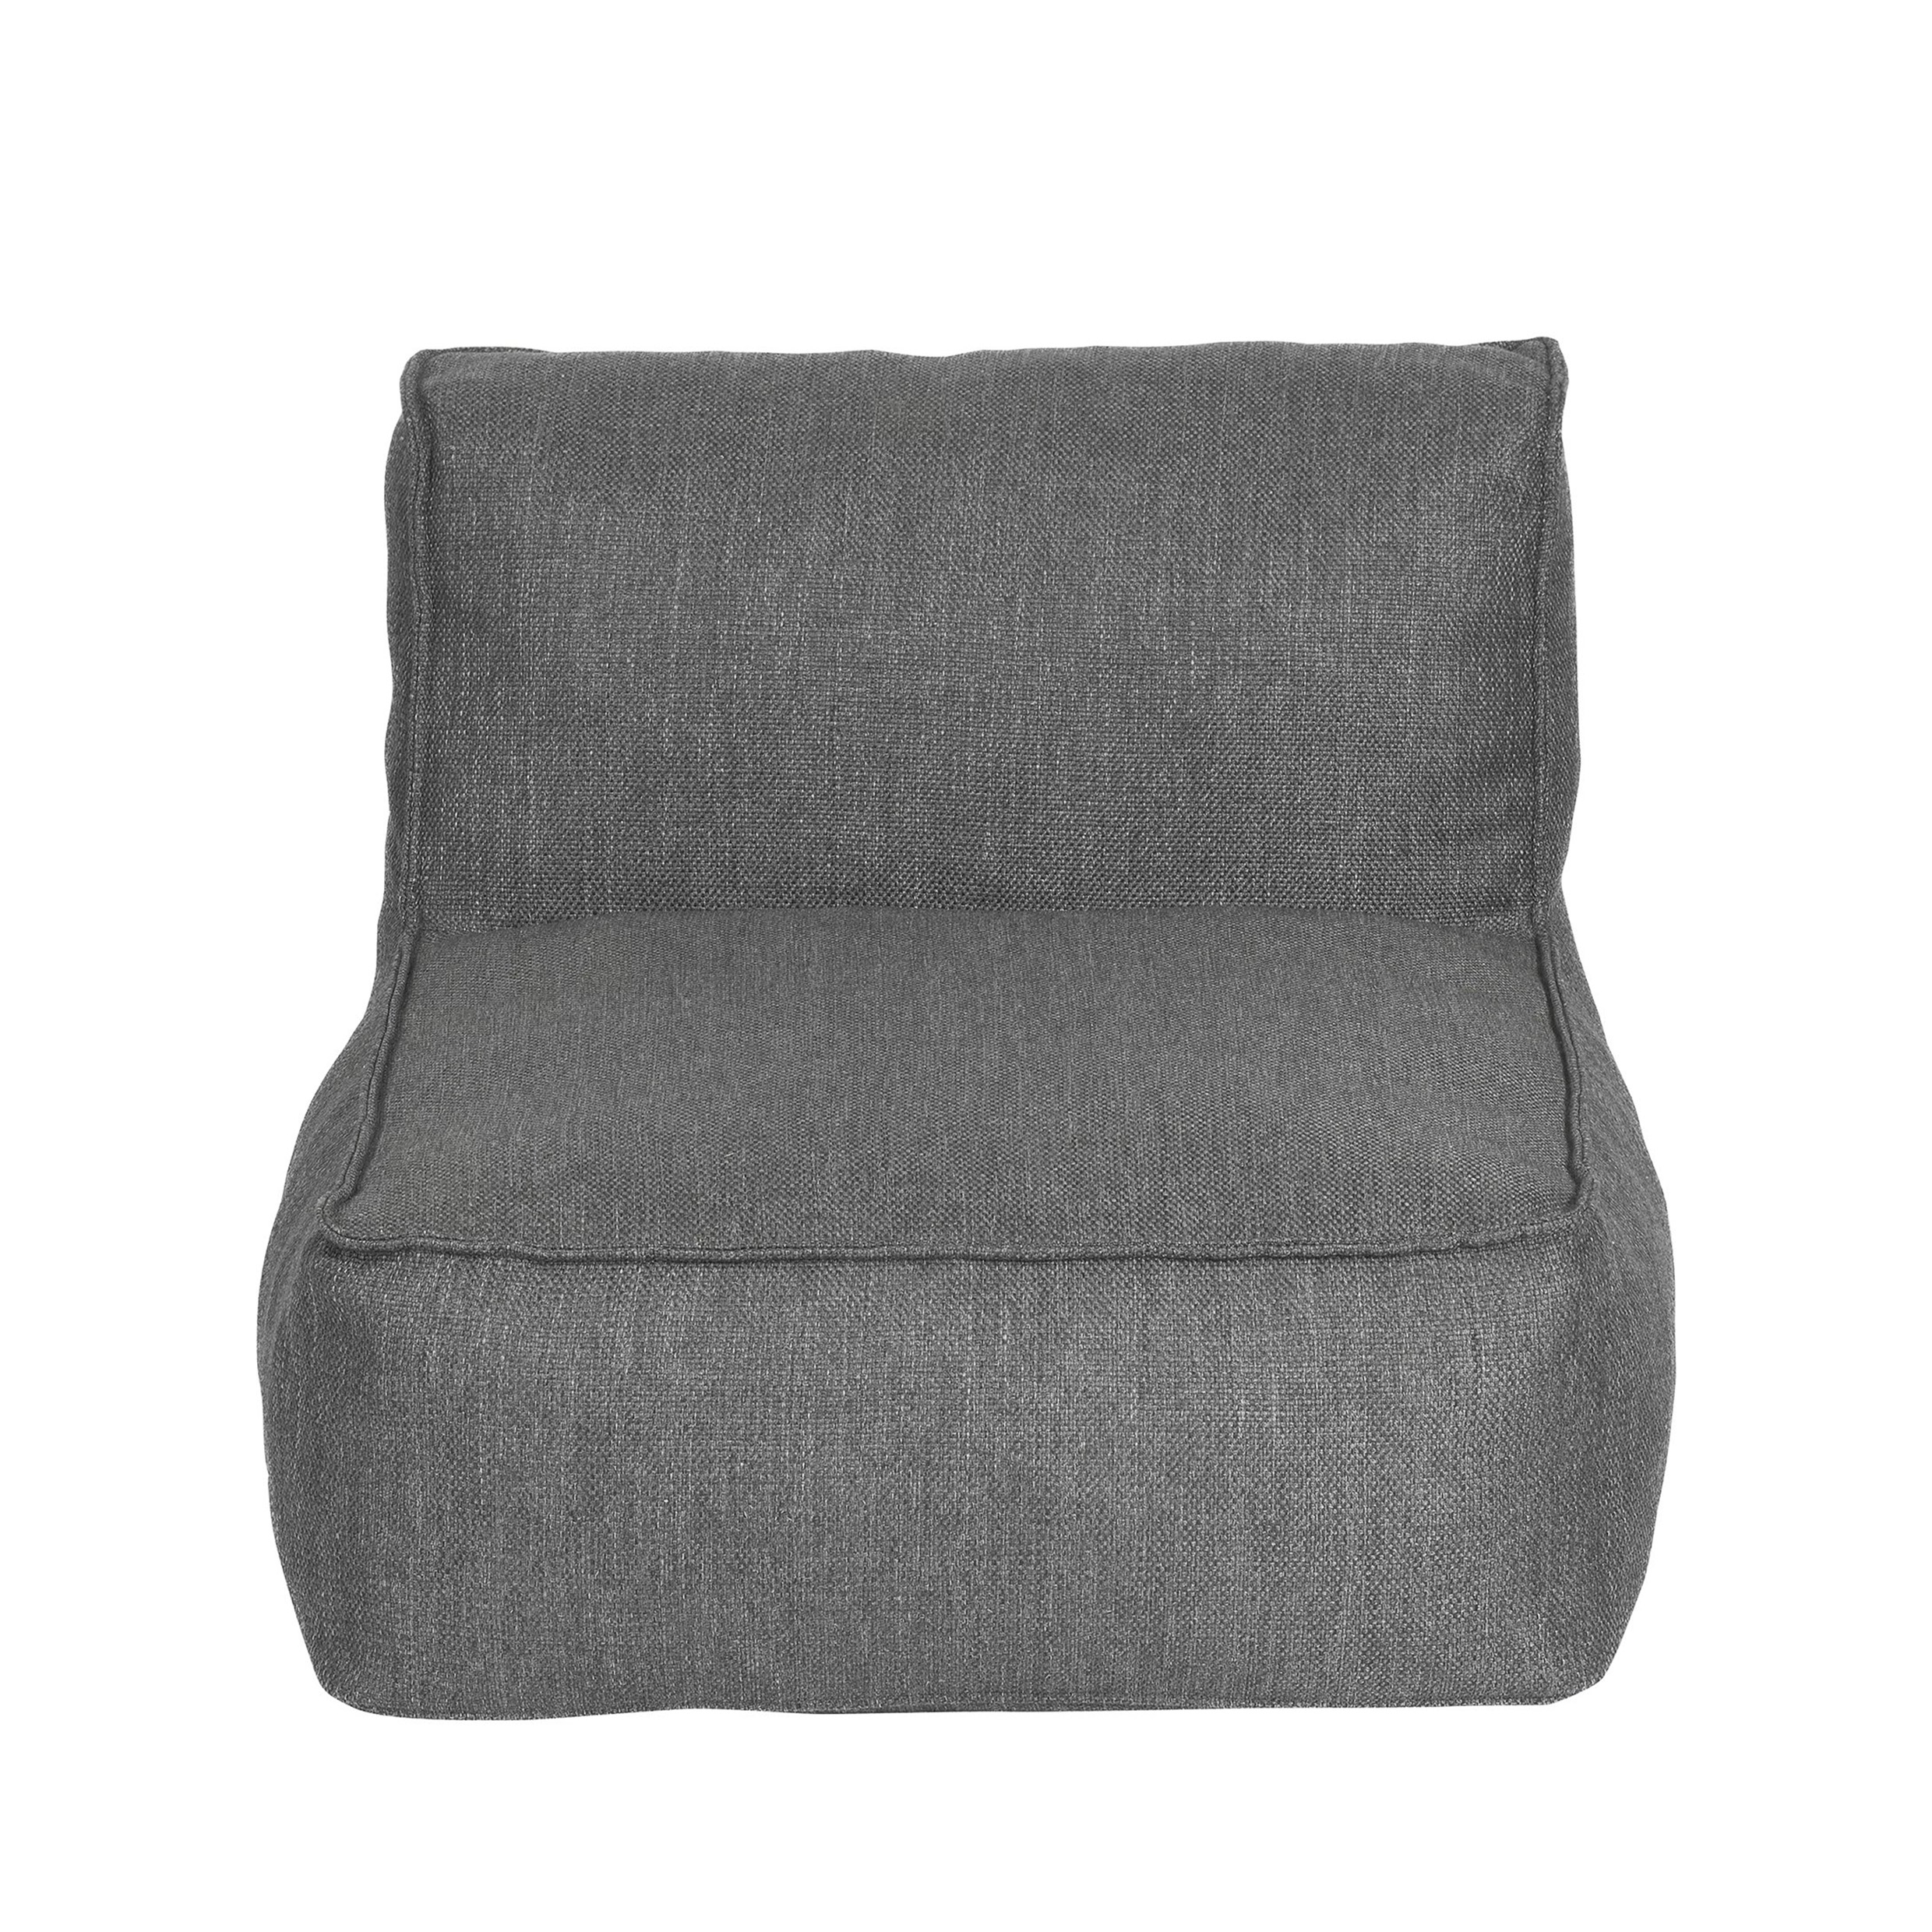 BLOMUS // GROW - OUTDOOR 1-SEATER | CHARCOAL